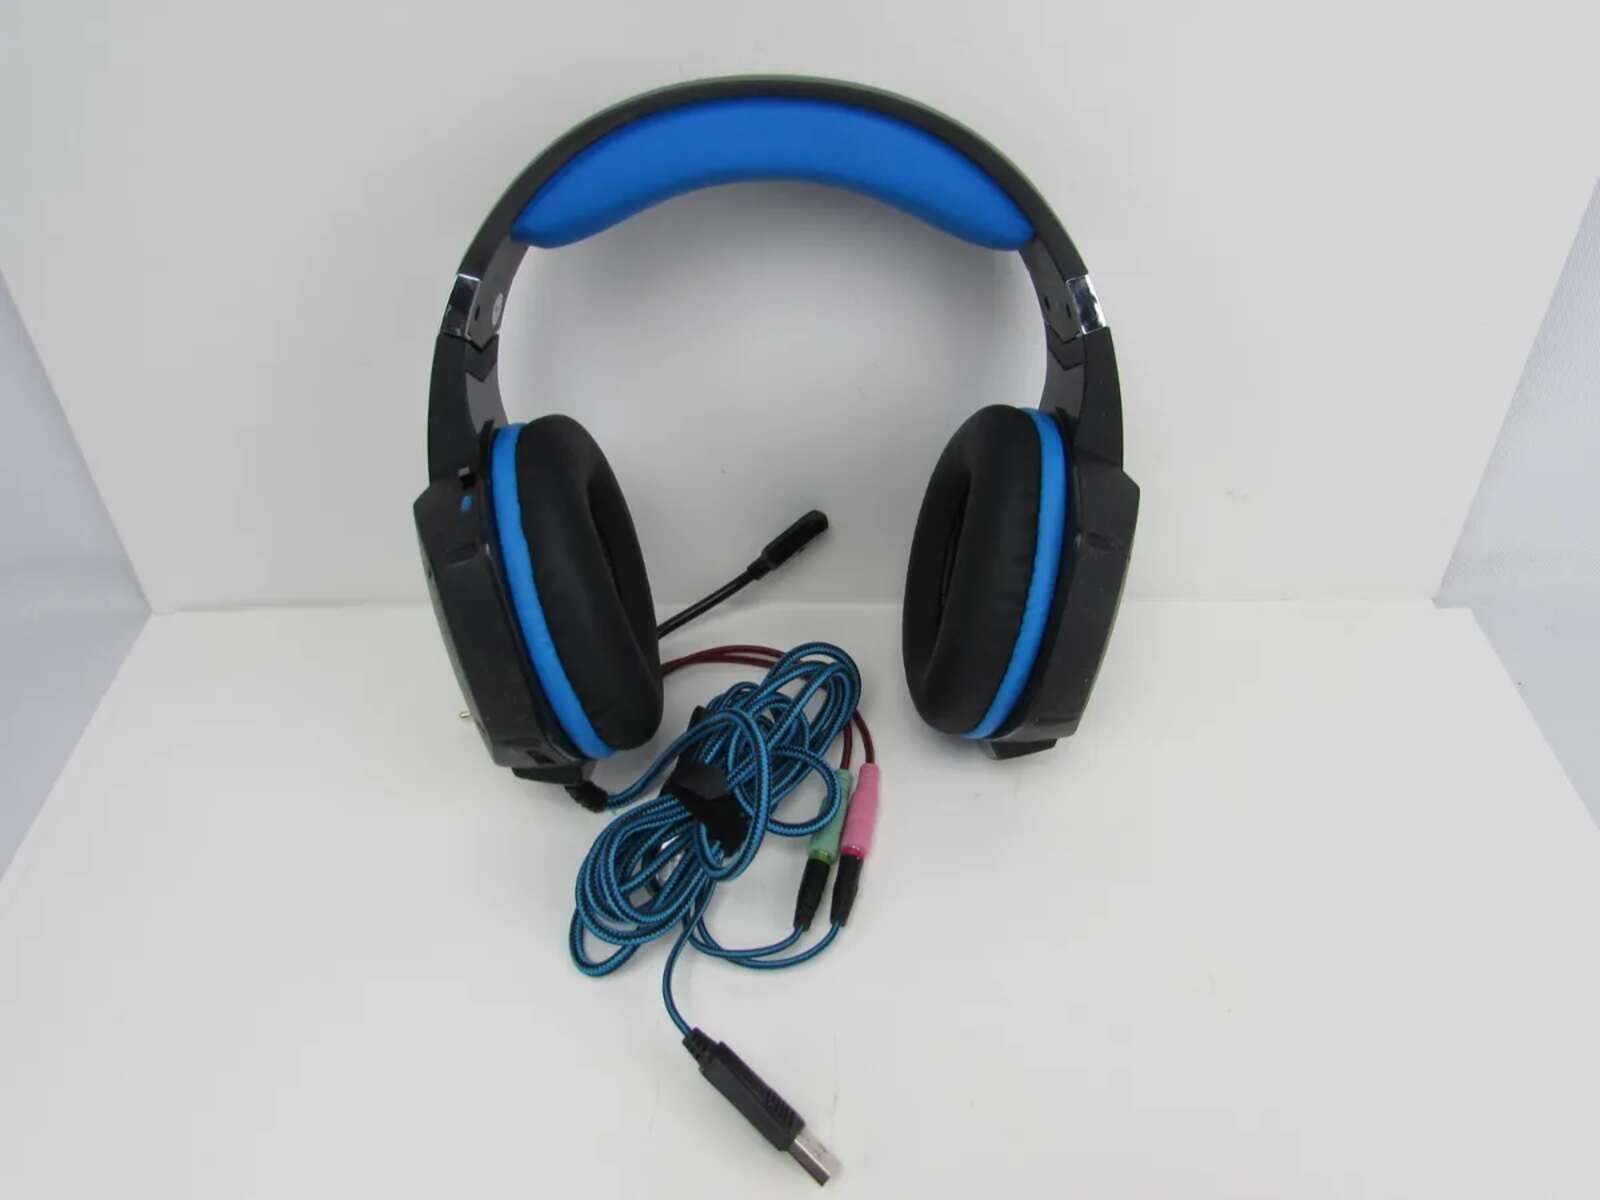 kotion-g1000-gaming-headset-how-to-control-led-lights